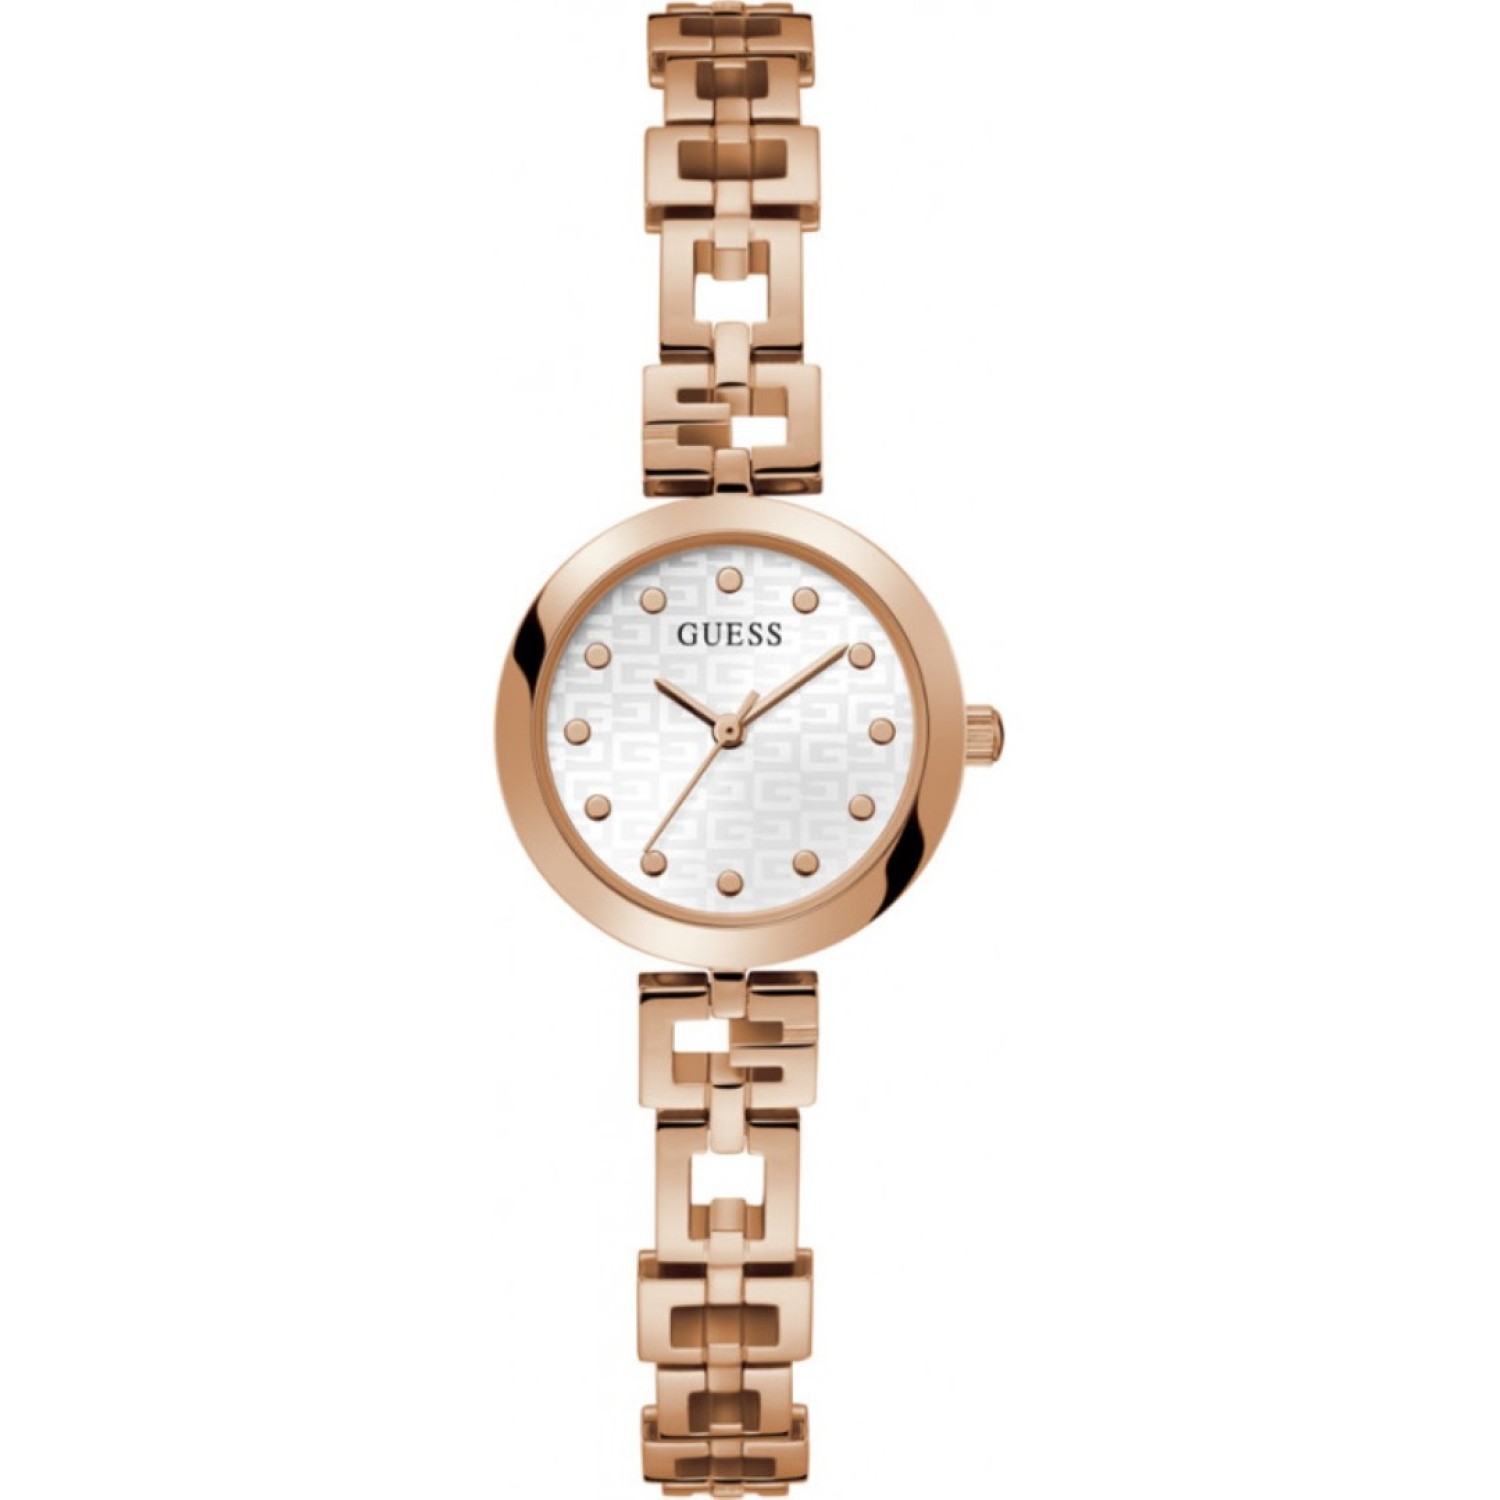 GW0549L3  Guess  Lady- G Rose -Tone  Womans Watch. The GW0549L3 is a beautiful women's watch from the Guess Lady- G Collection.